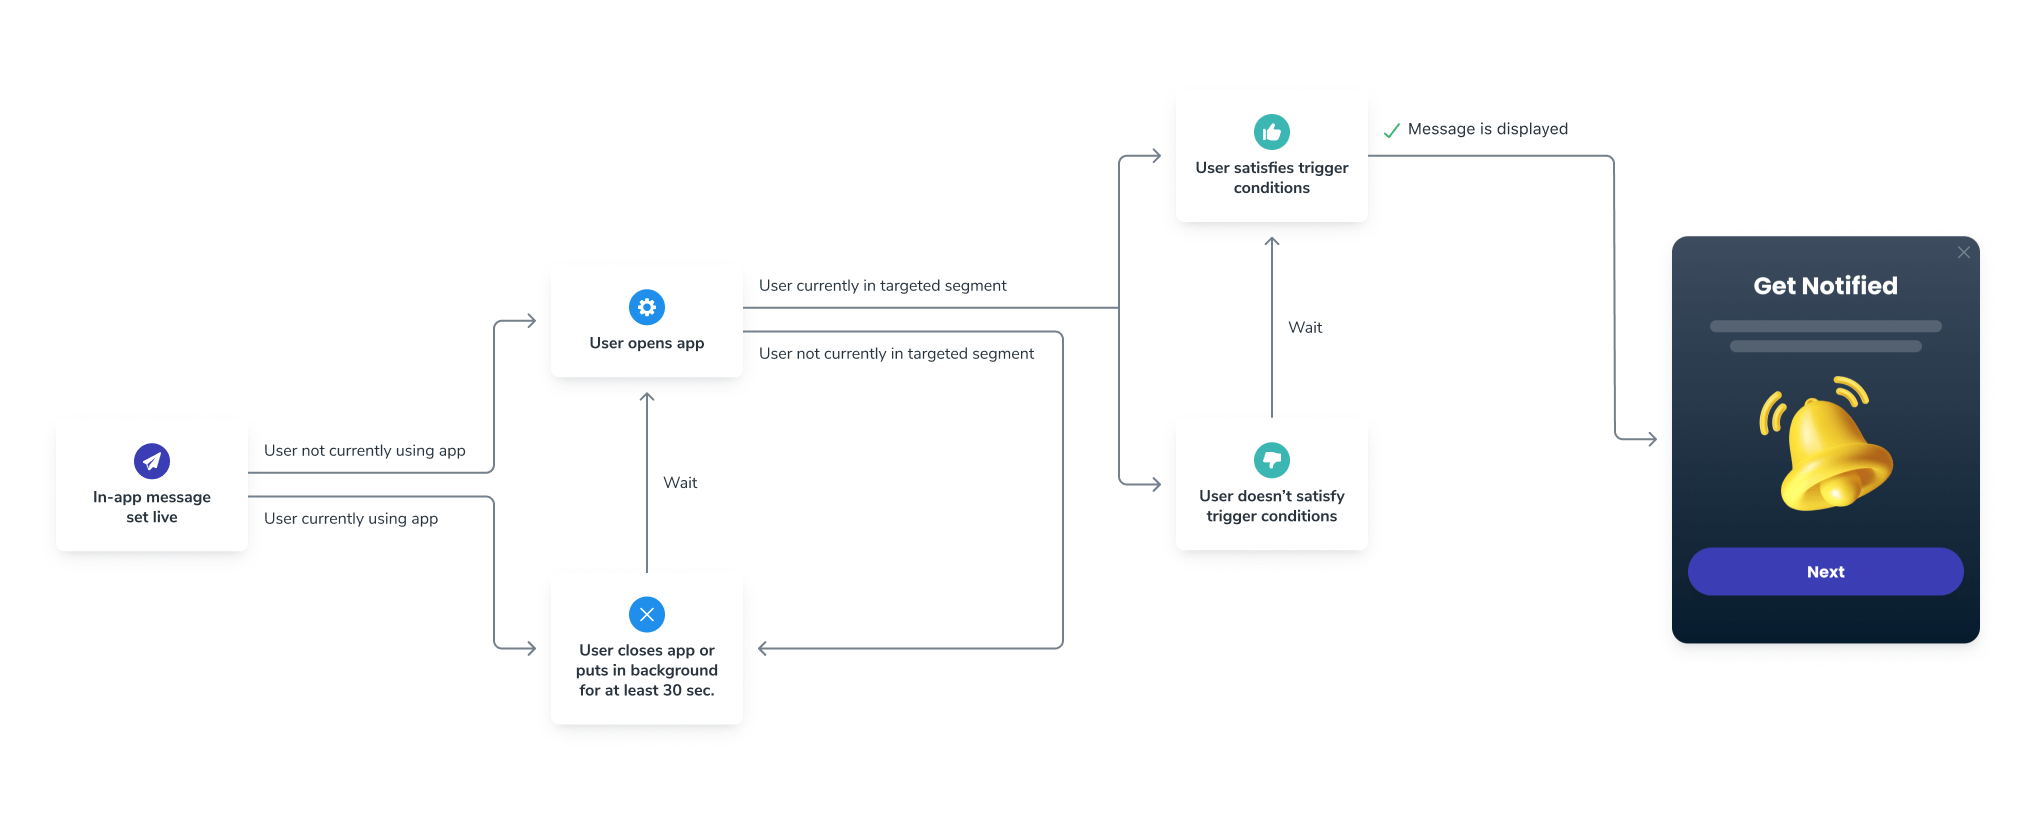 A flow diagram which shows how in-app messages are shown to users. 